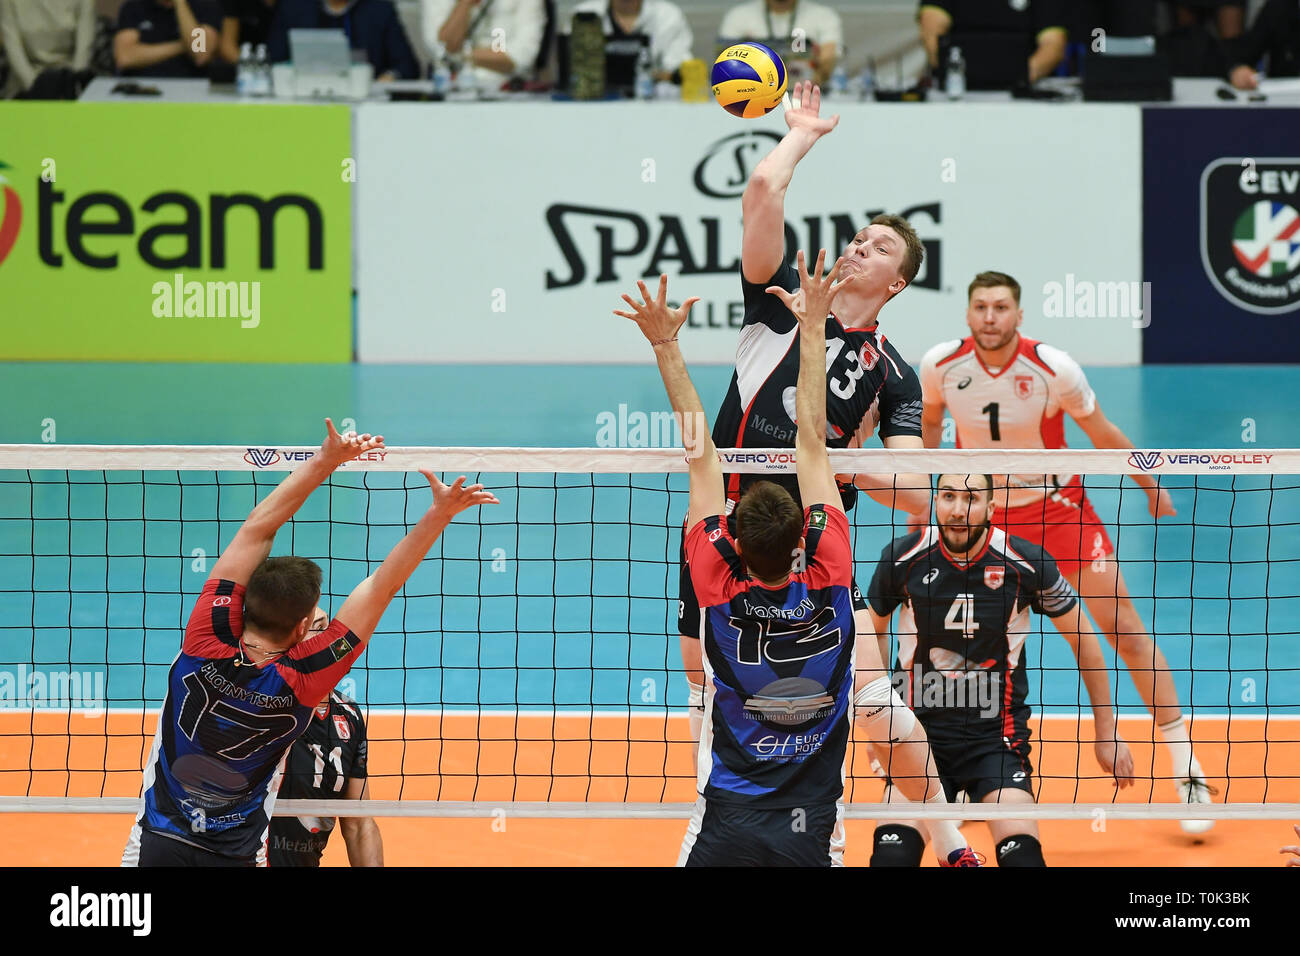 Candy Arena, Monza, Italy. 20th March, 2019. CEV Volleyball Challenge Cup men, Final, 1st leg. Alexander Safonov of Belogorie Belgorod during the match between Vero Volley Monza and Belogorie Belgorod at the Candy Arena Italy.  Credit: Claudio Grassi/Alamy Live News Stock Photo